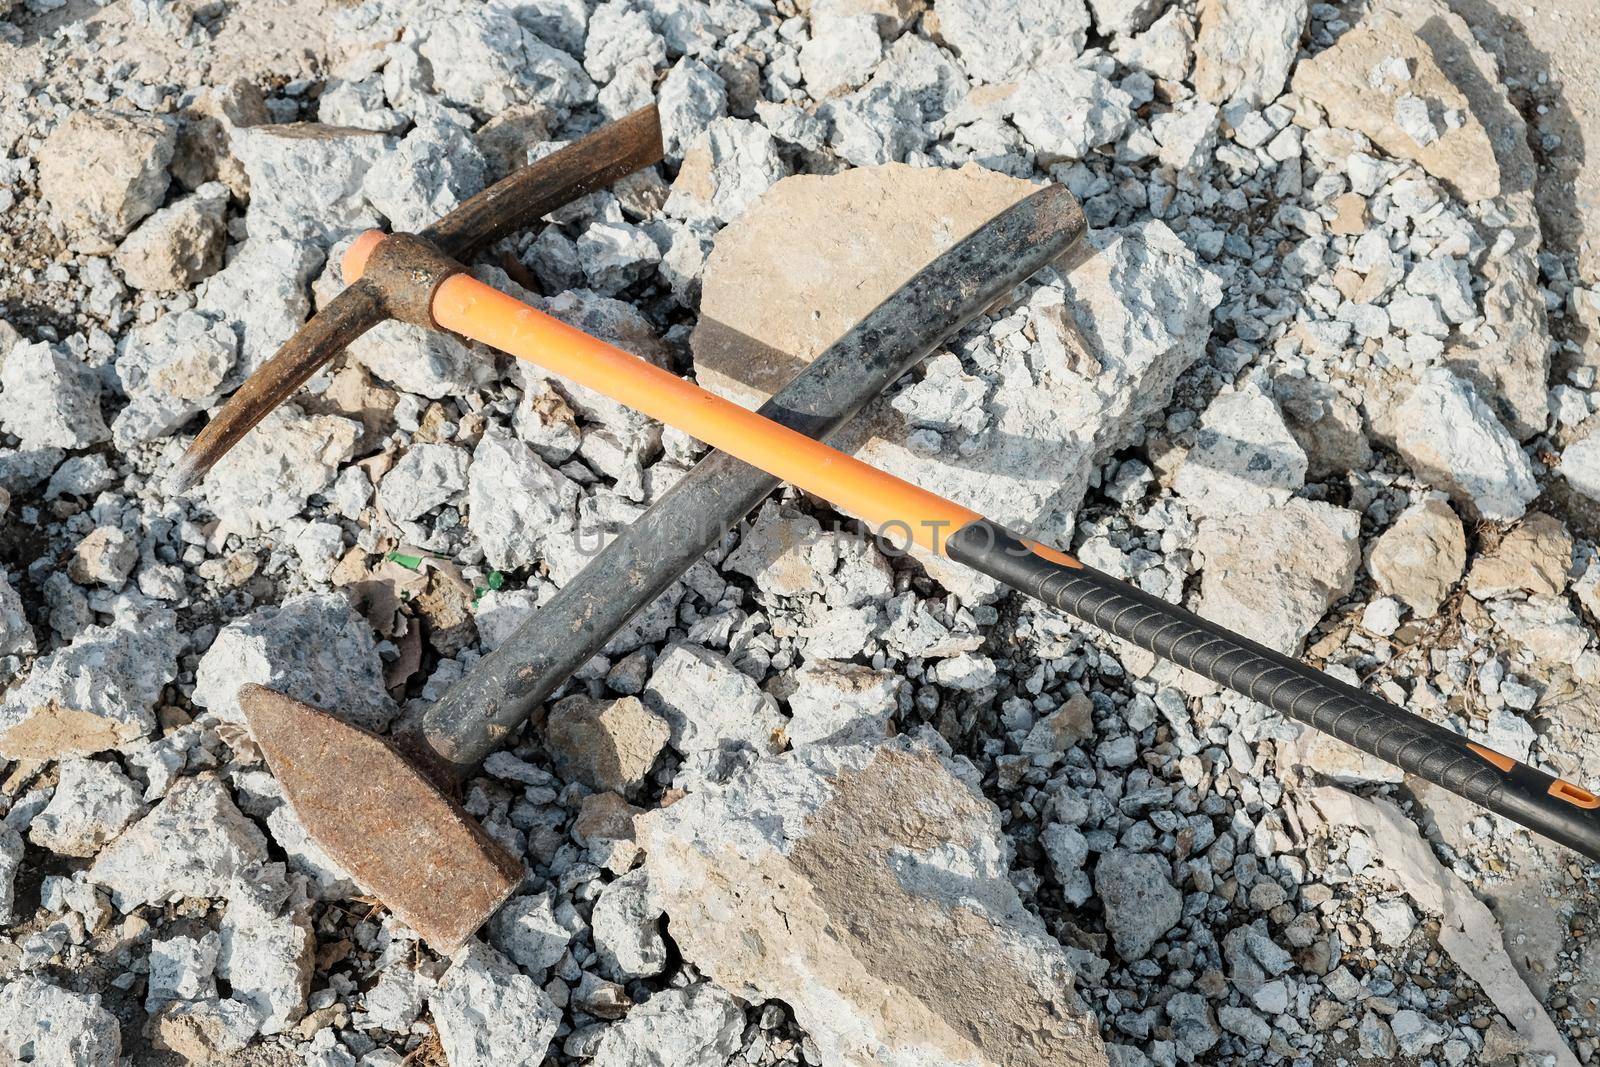 Geological pick with orange handle on the stones next to old hammer.